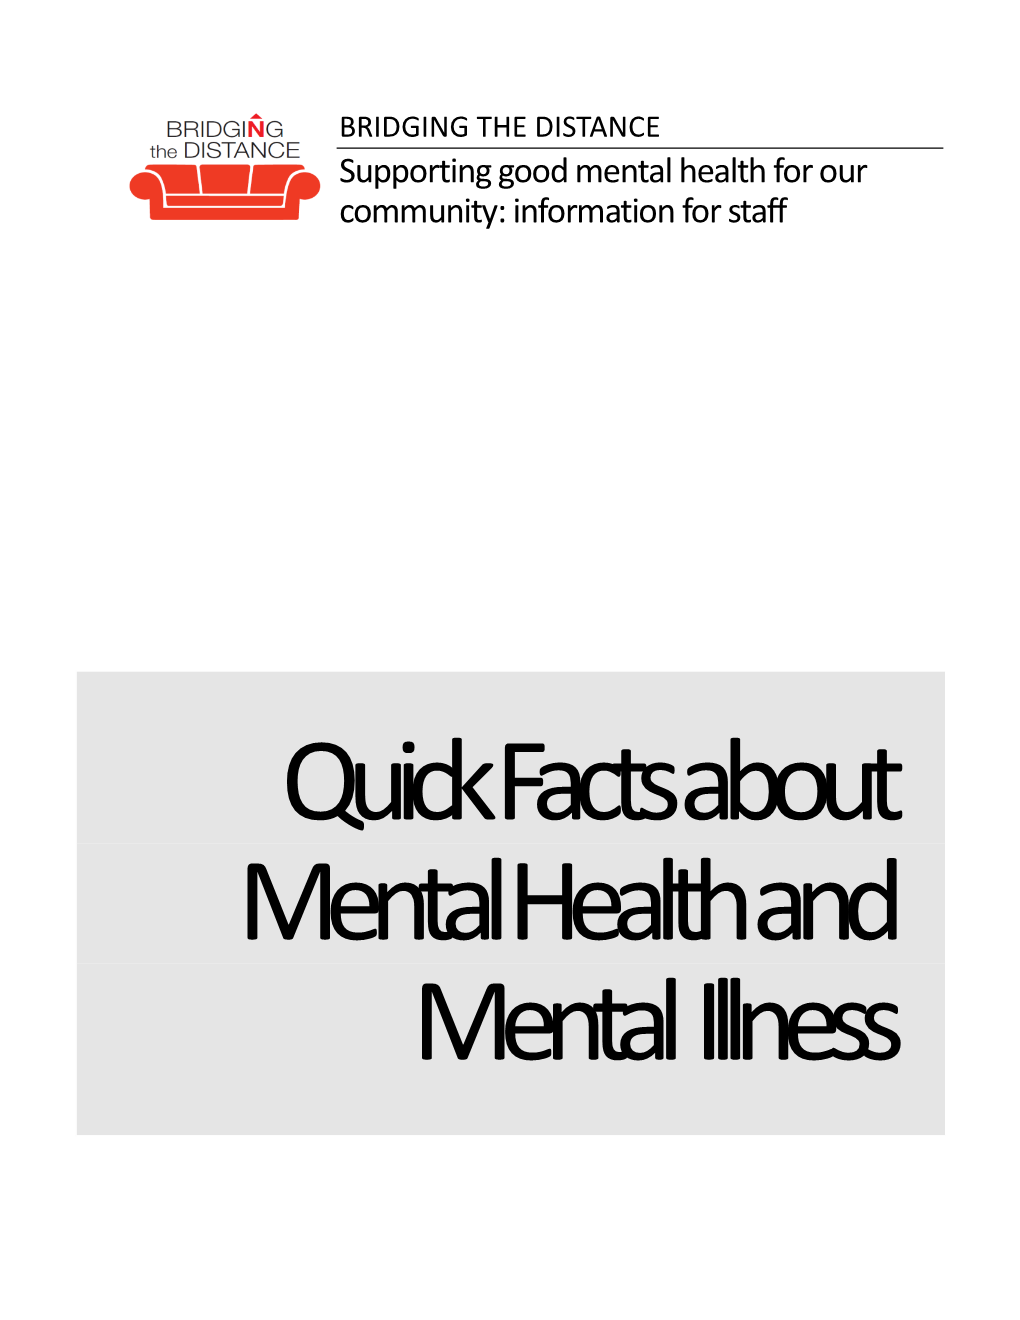 Supporting Good Mental Health for Our Community: Information for Staff